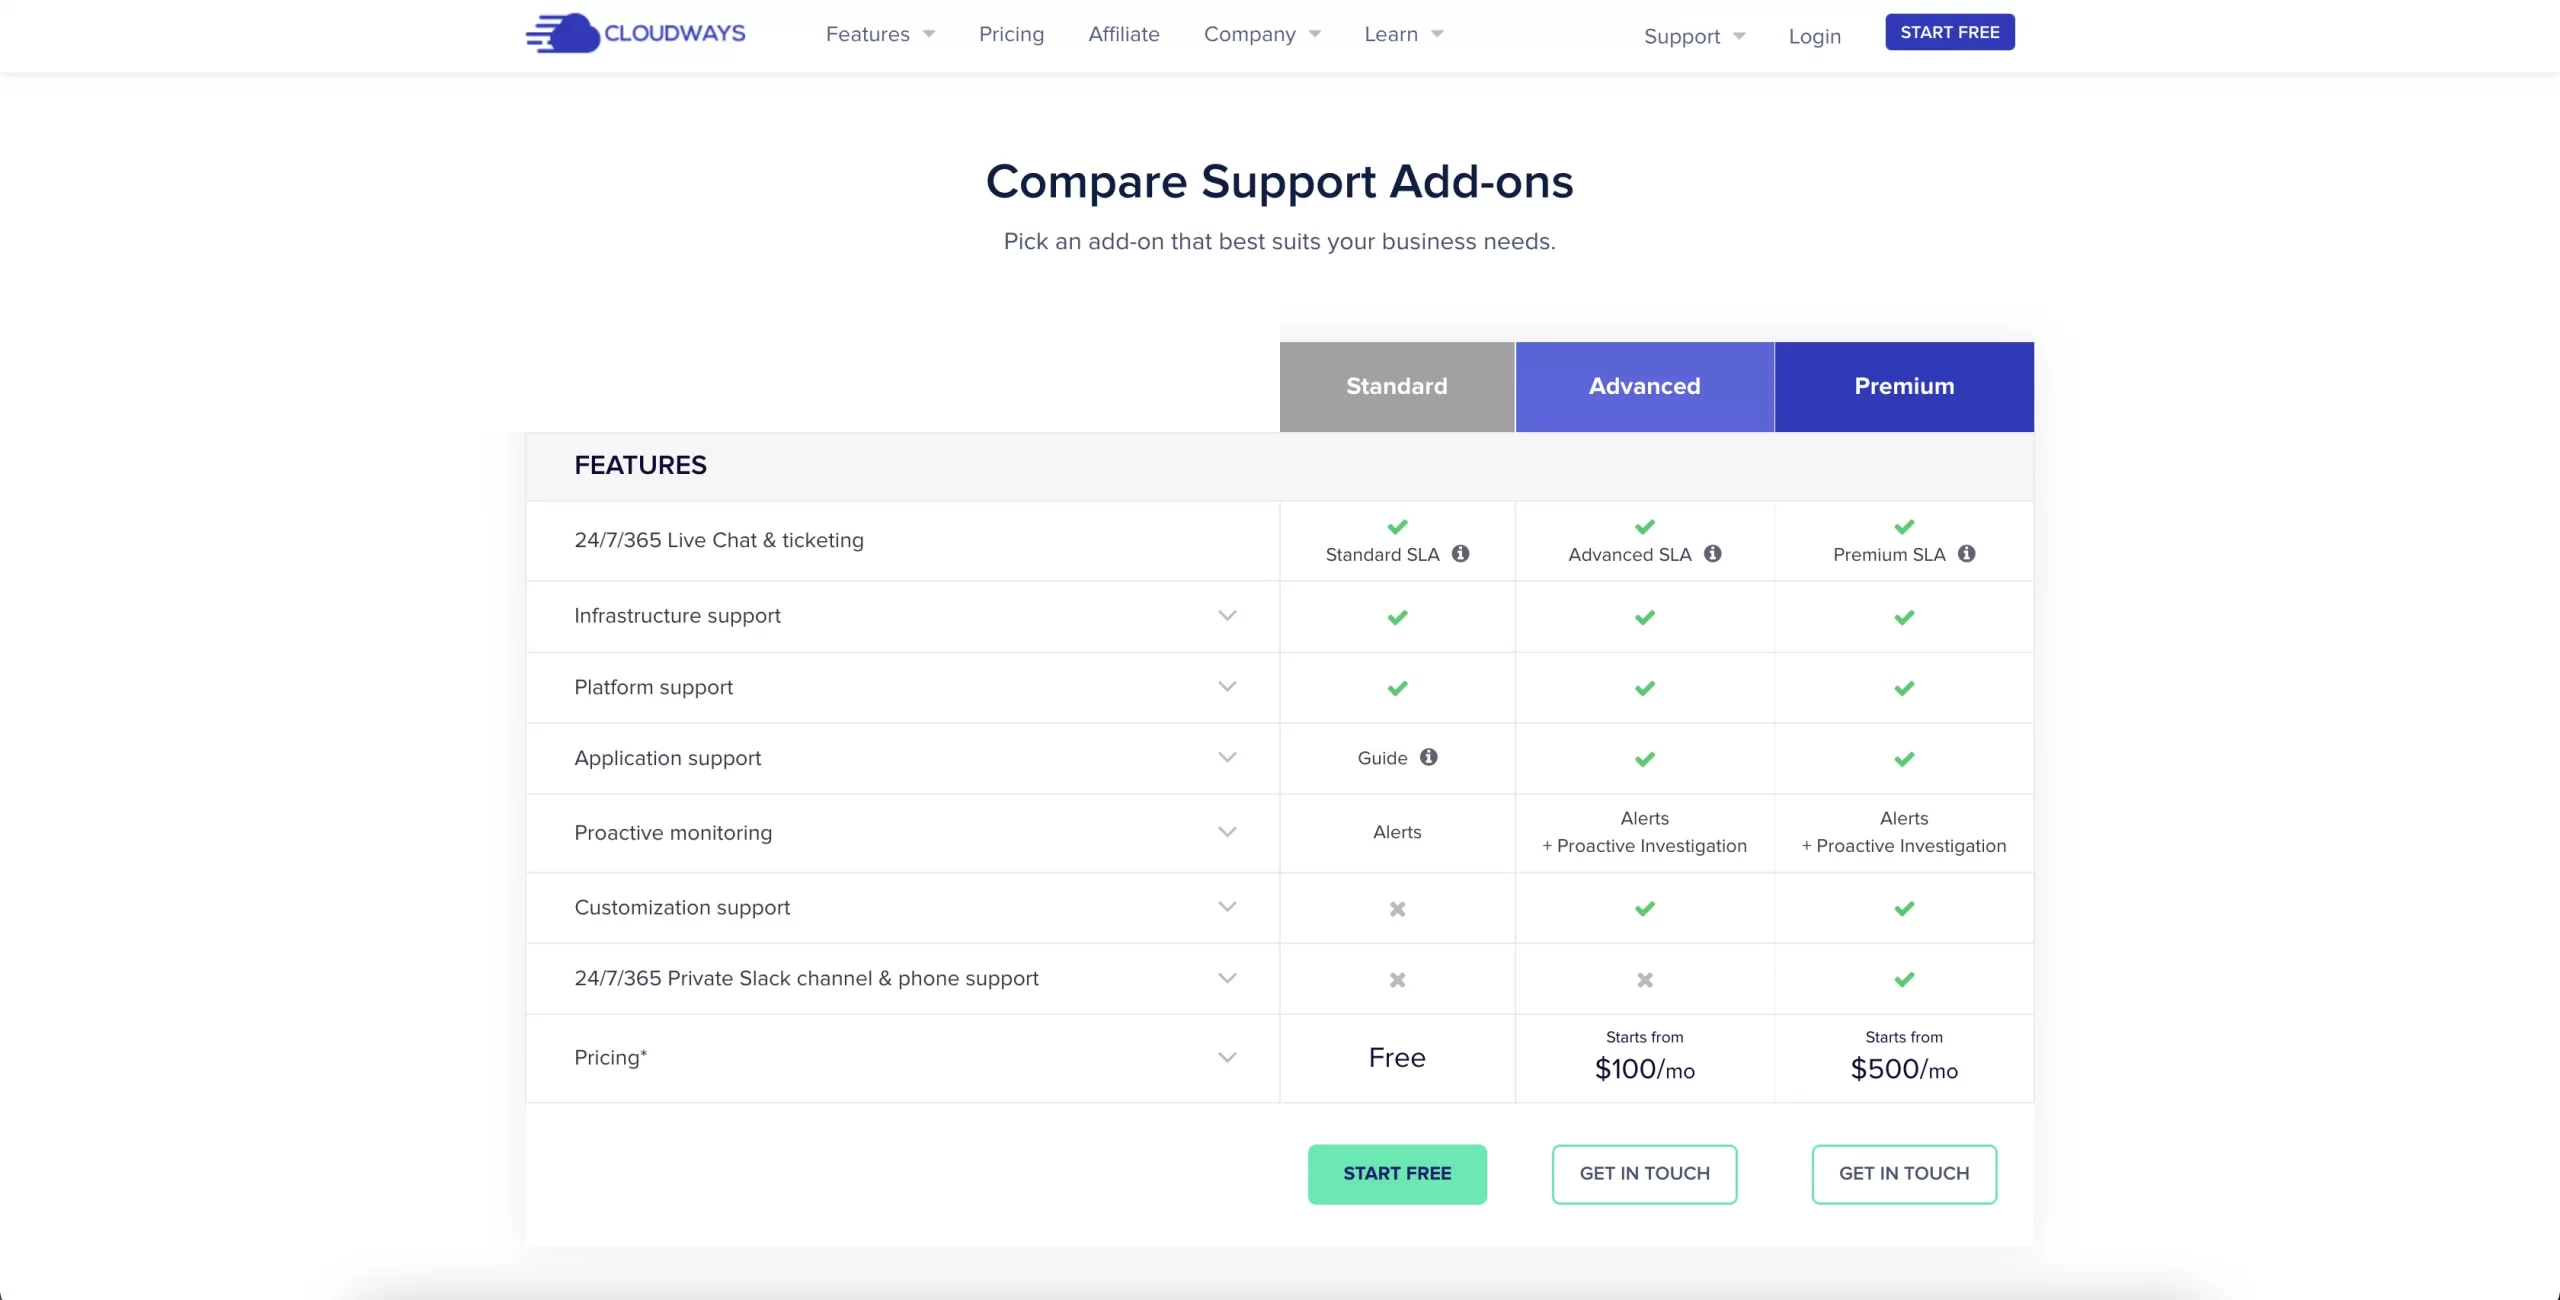 Cloudways Support Add-ons